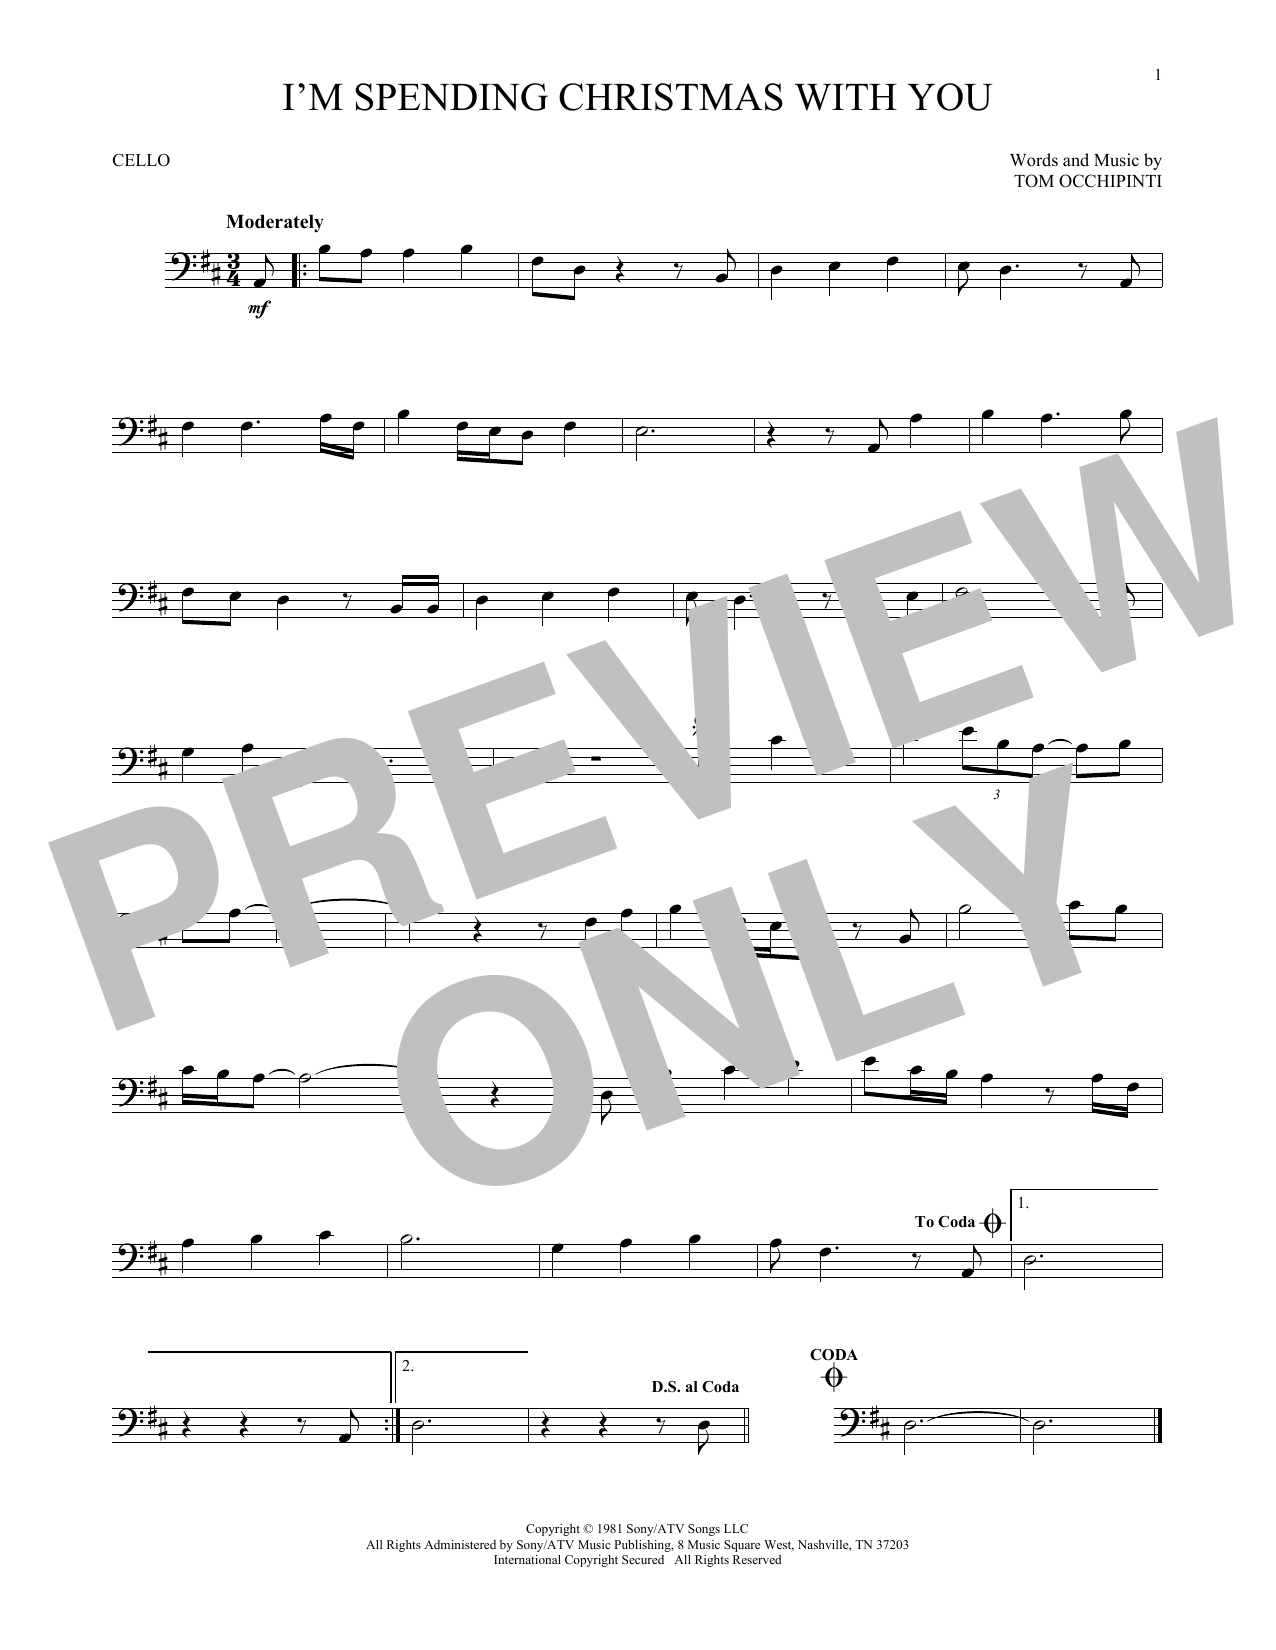 Download Tom Occhipinti I'm Spending Christmas With You Sheet Music